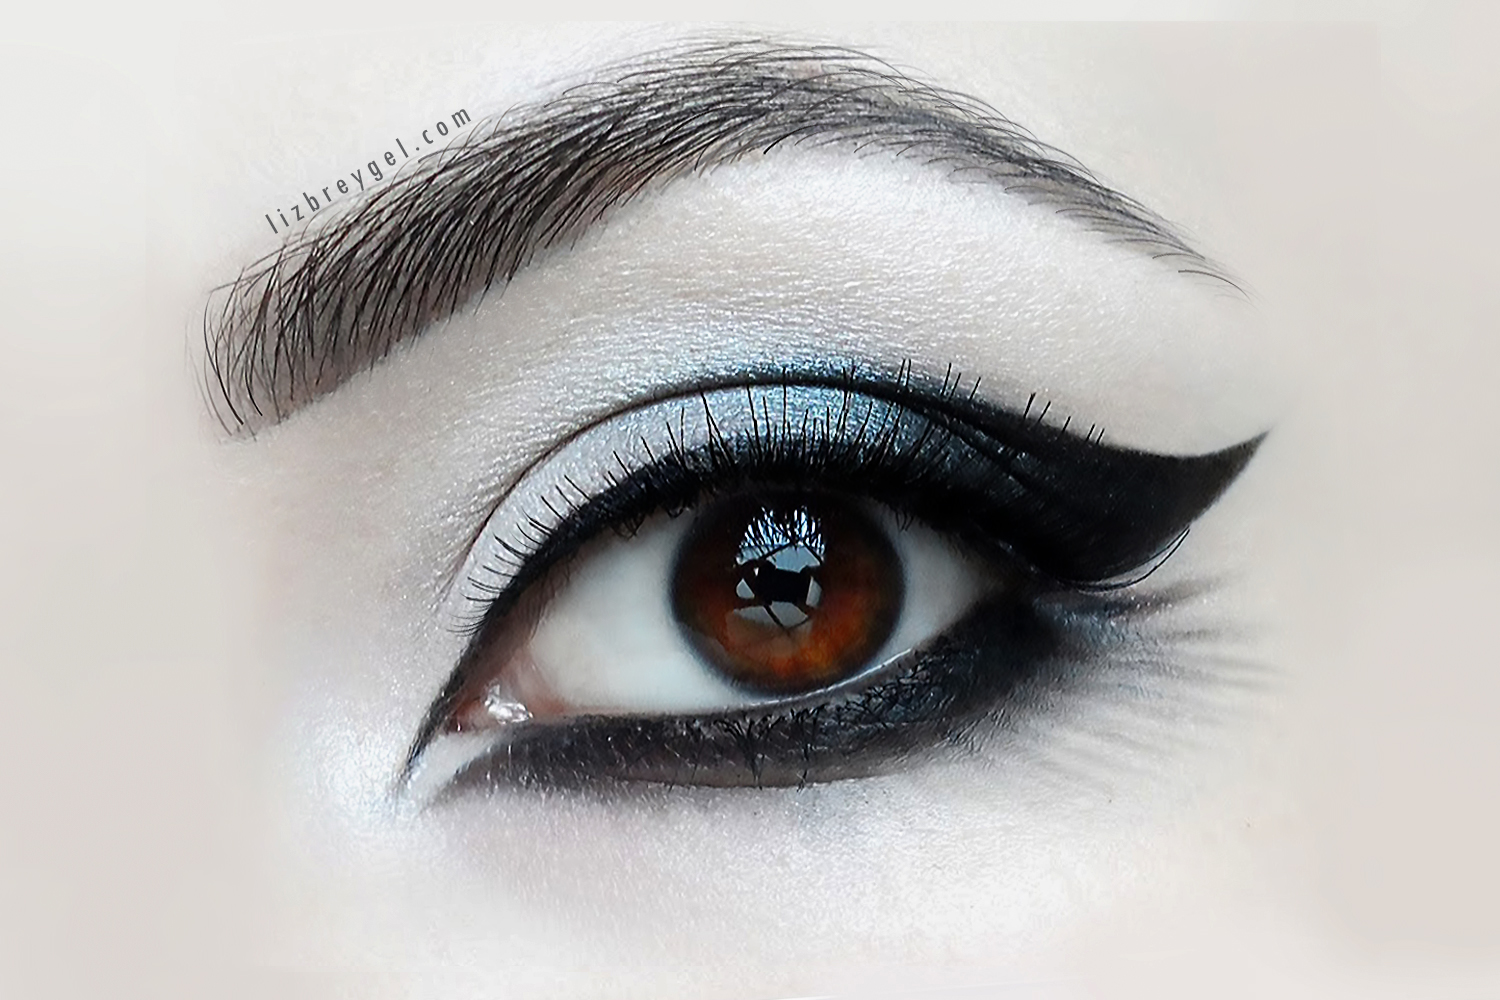 a close-up of a brown hooded eye with a dramatic silver and black eyeshadow and false eyelashes